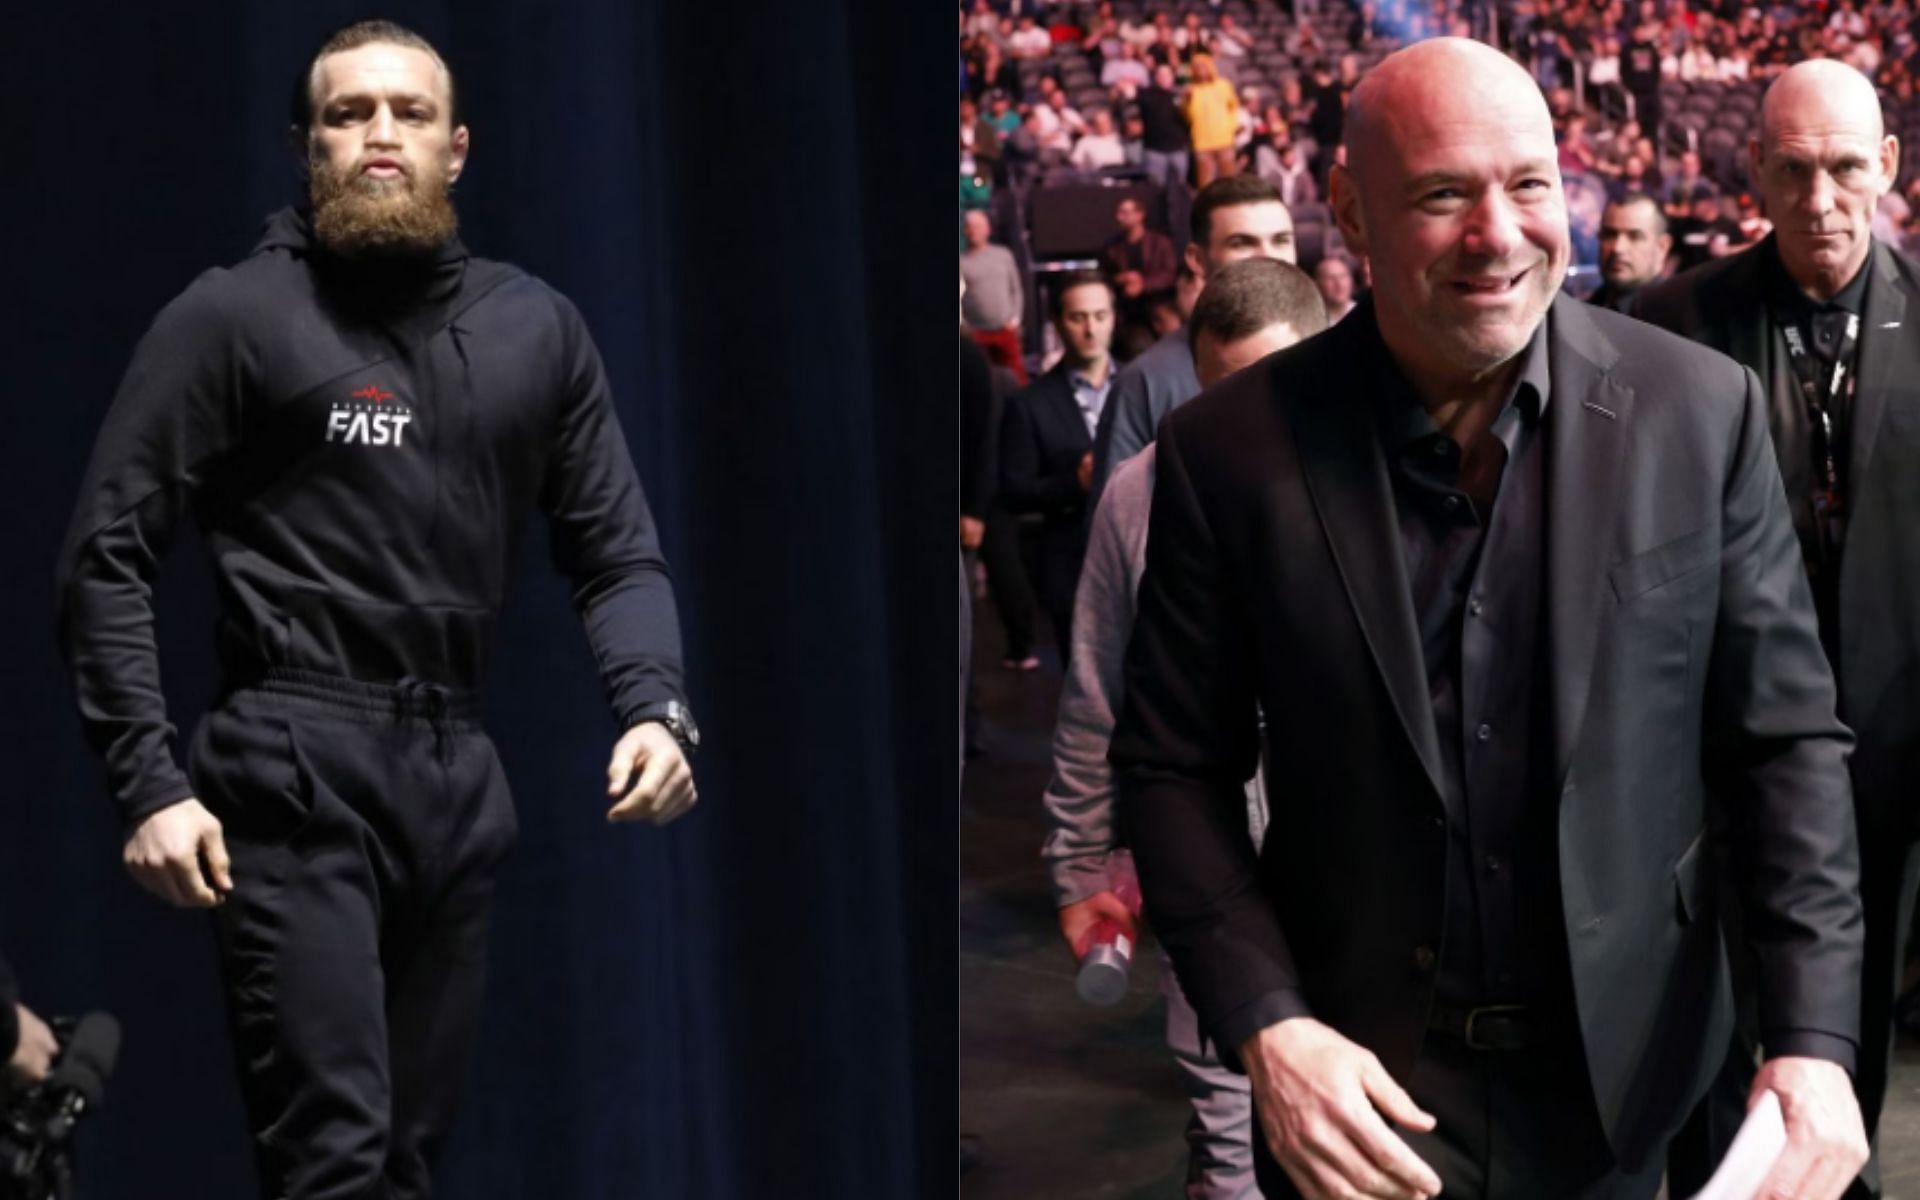 Conor Mcgregor on the left and UFC president Dana White on the right